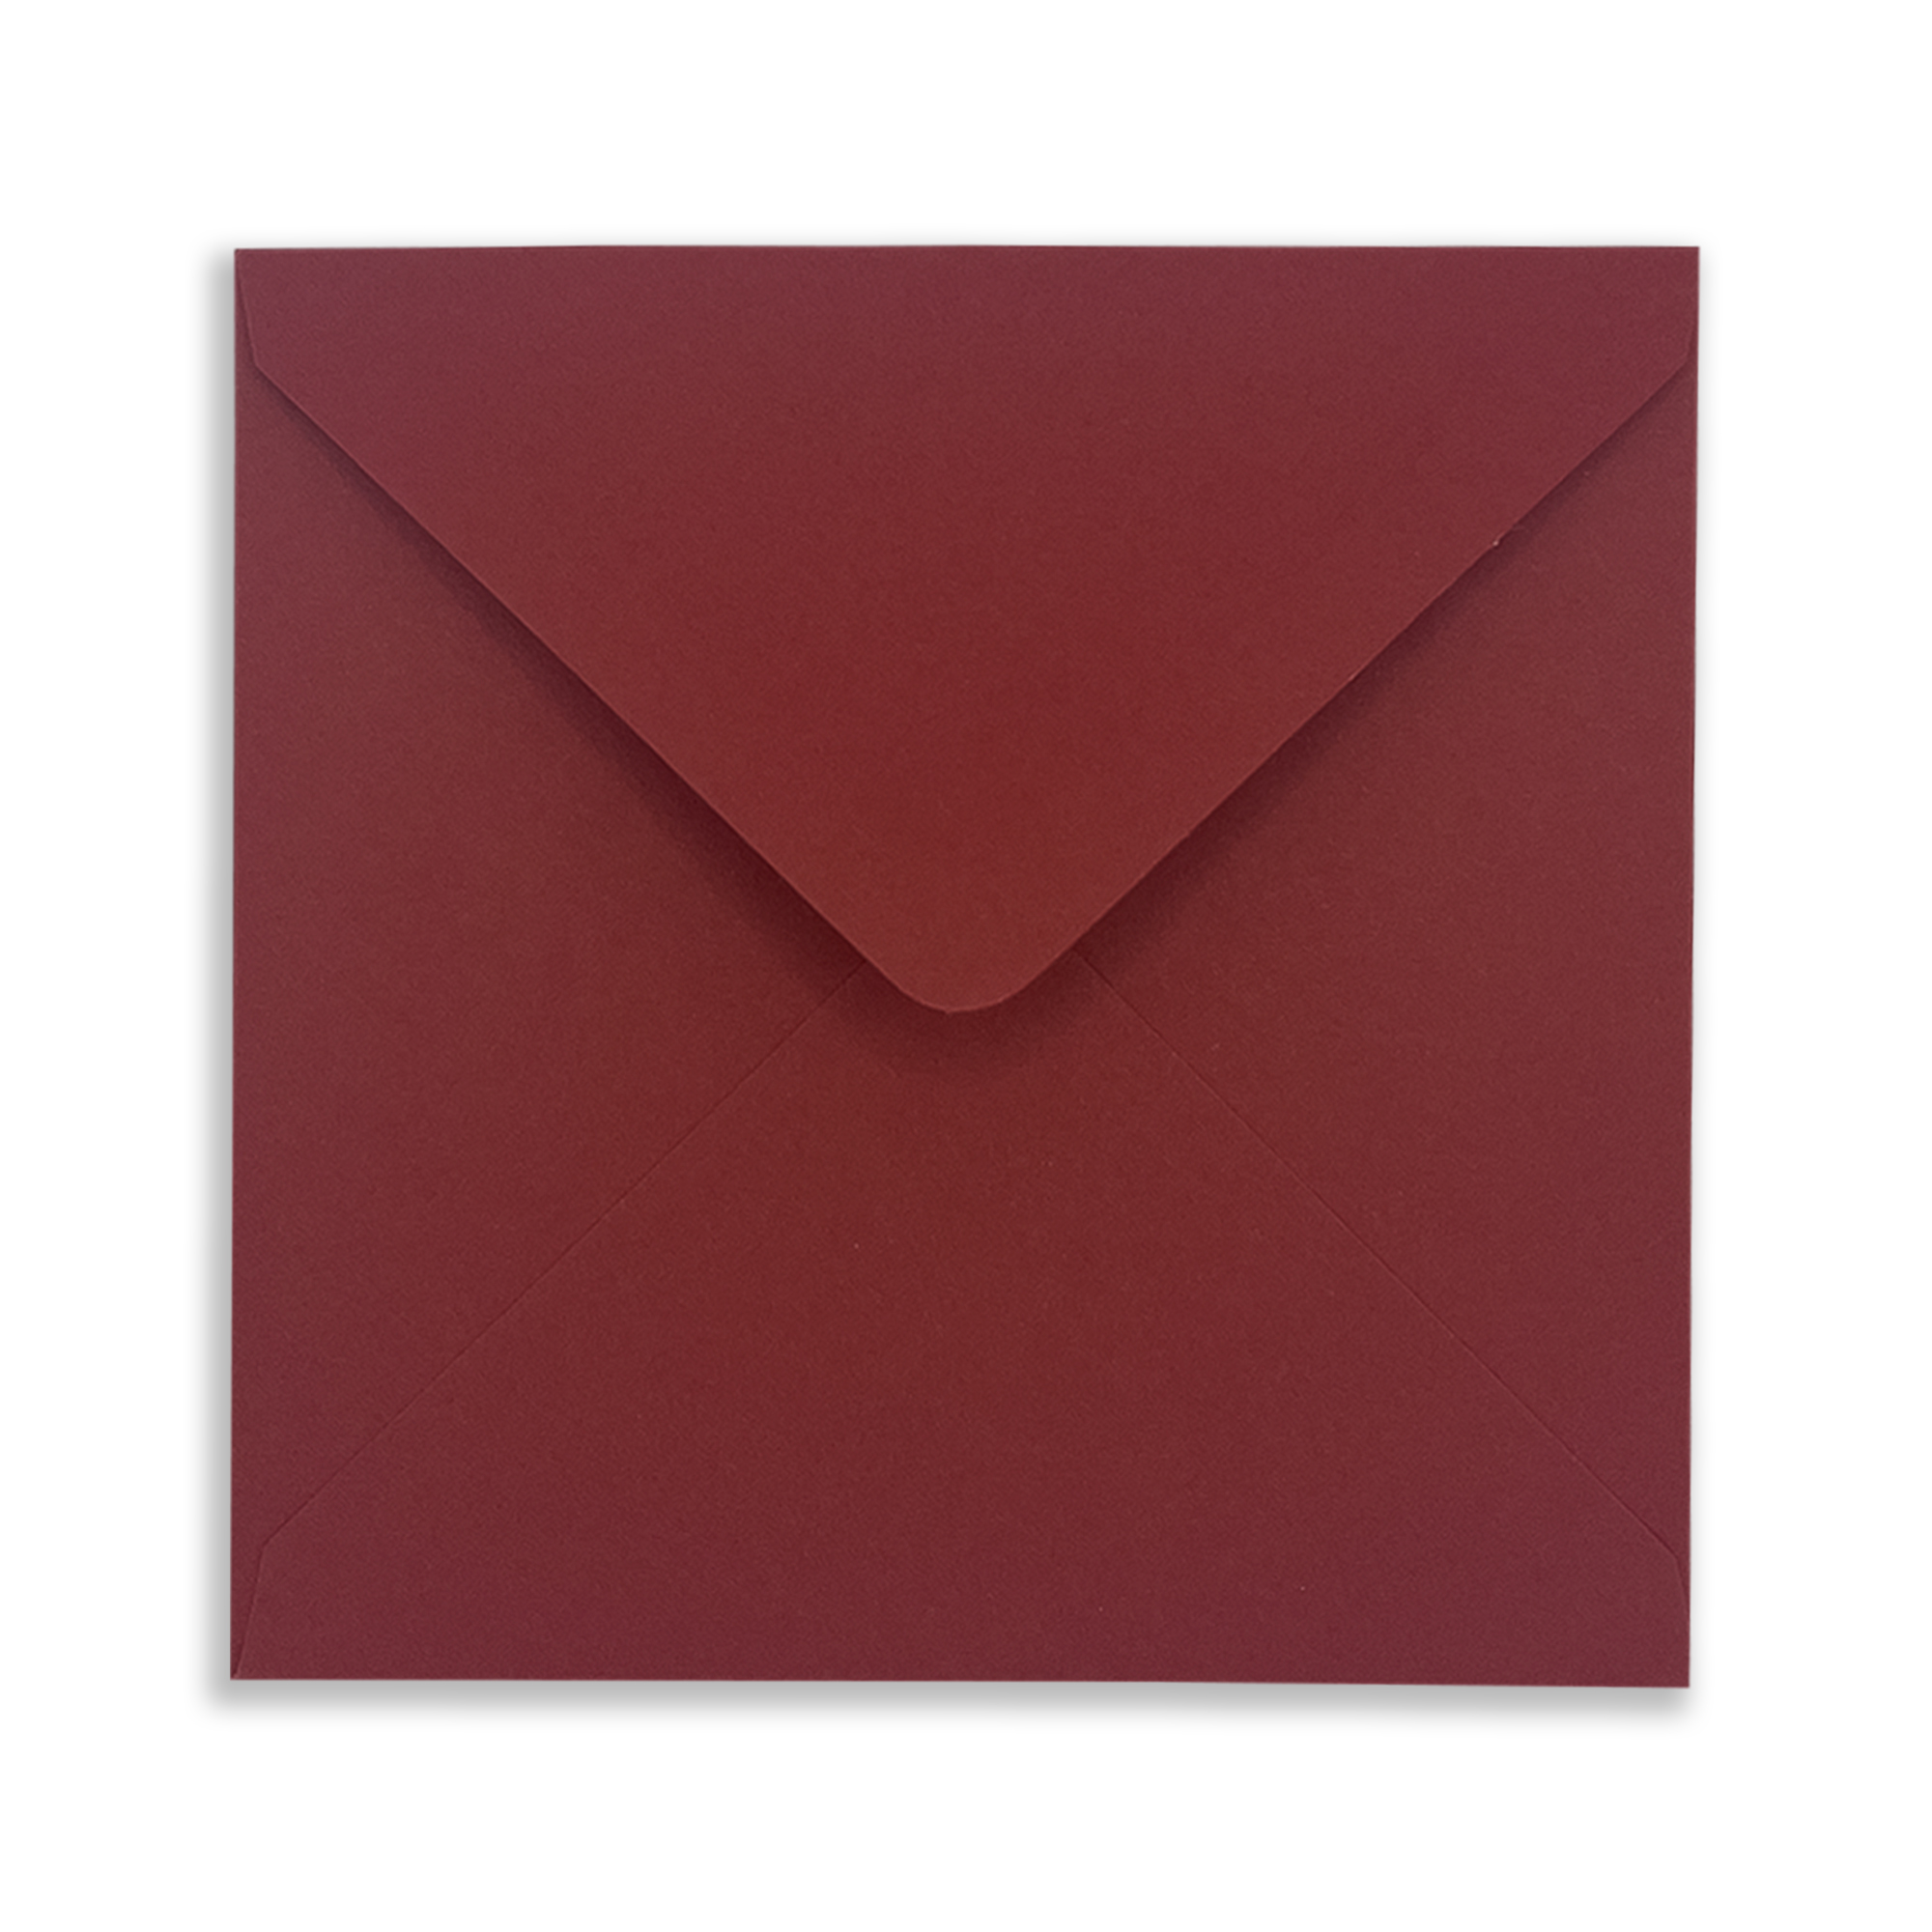 125mmSQ_Christmas_Red_Envelope_Front